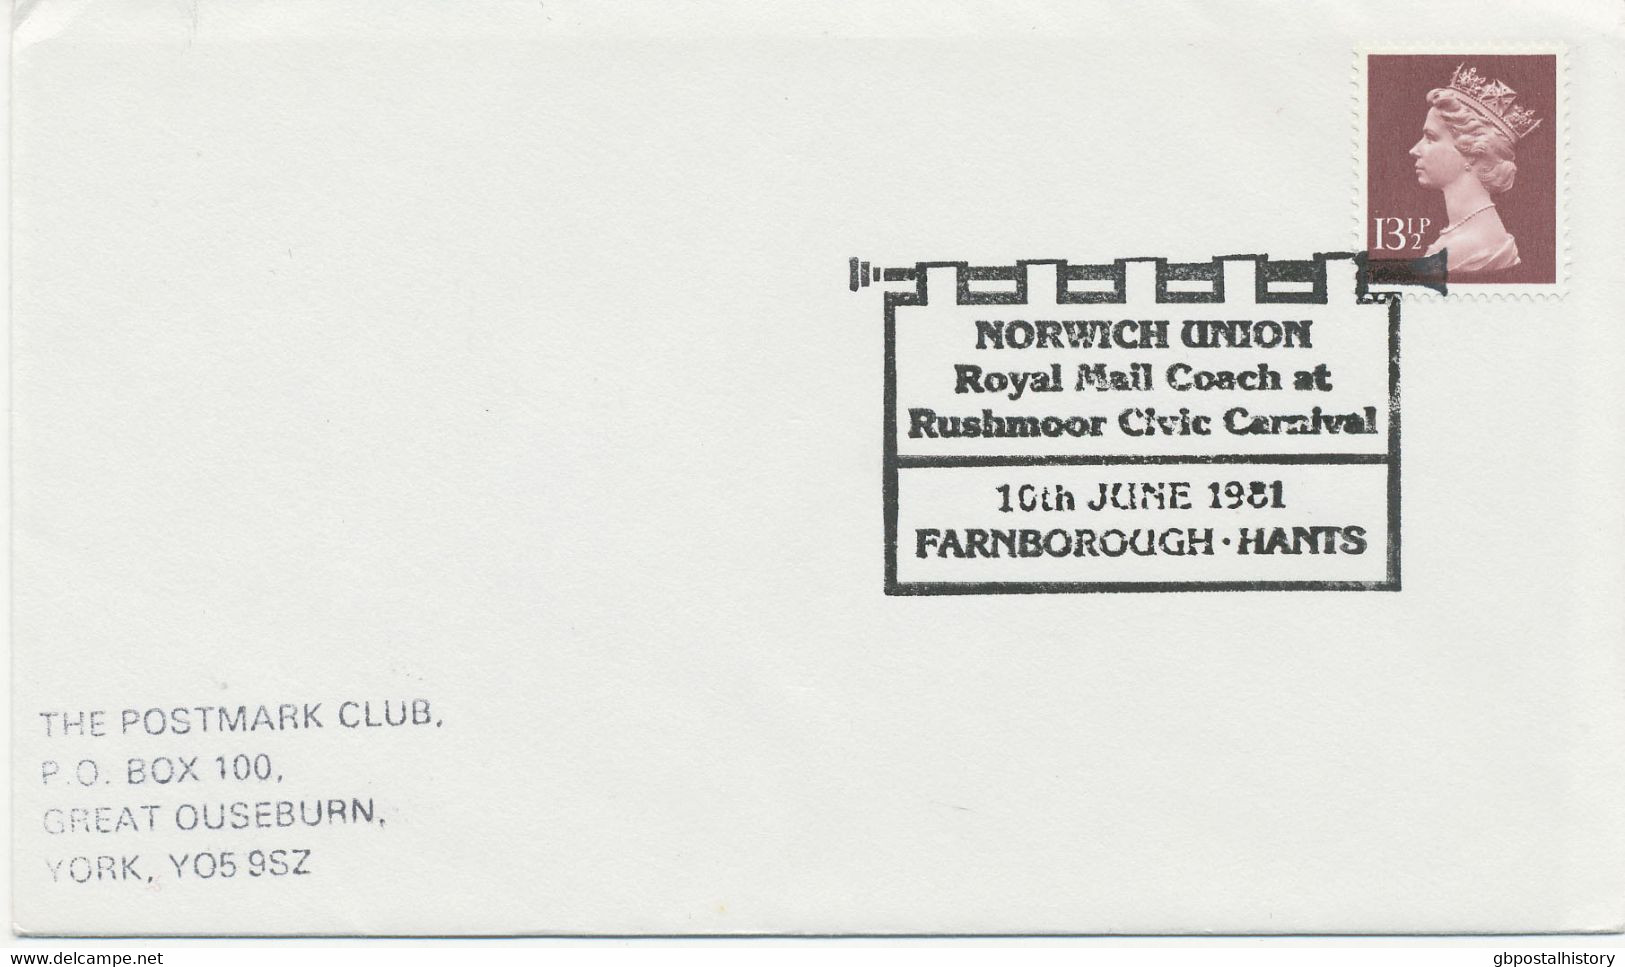 GB SPECIAL EVENT POSTMARK NORWICH UNION - Royal Mail Coach At Rushmoor Civic Carnival - 10th JUNE 1981 - FARNBOROUGH - H - Diligencias